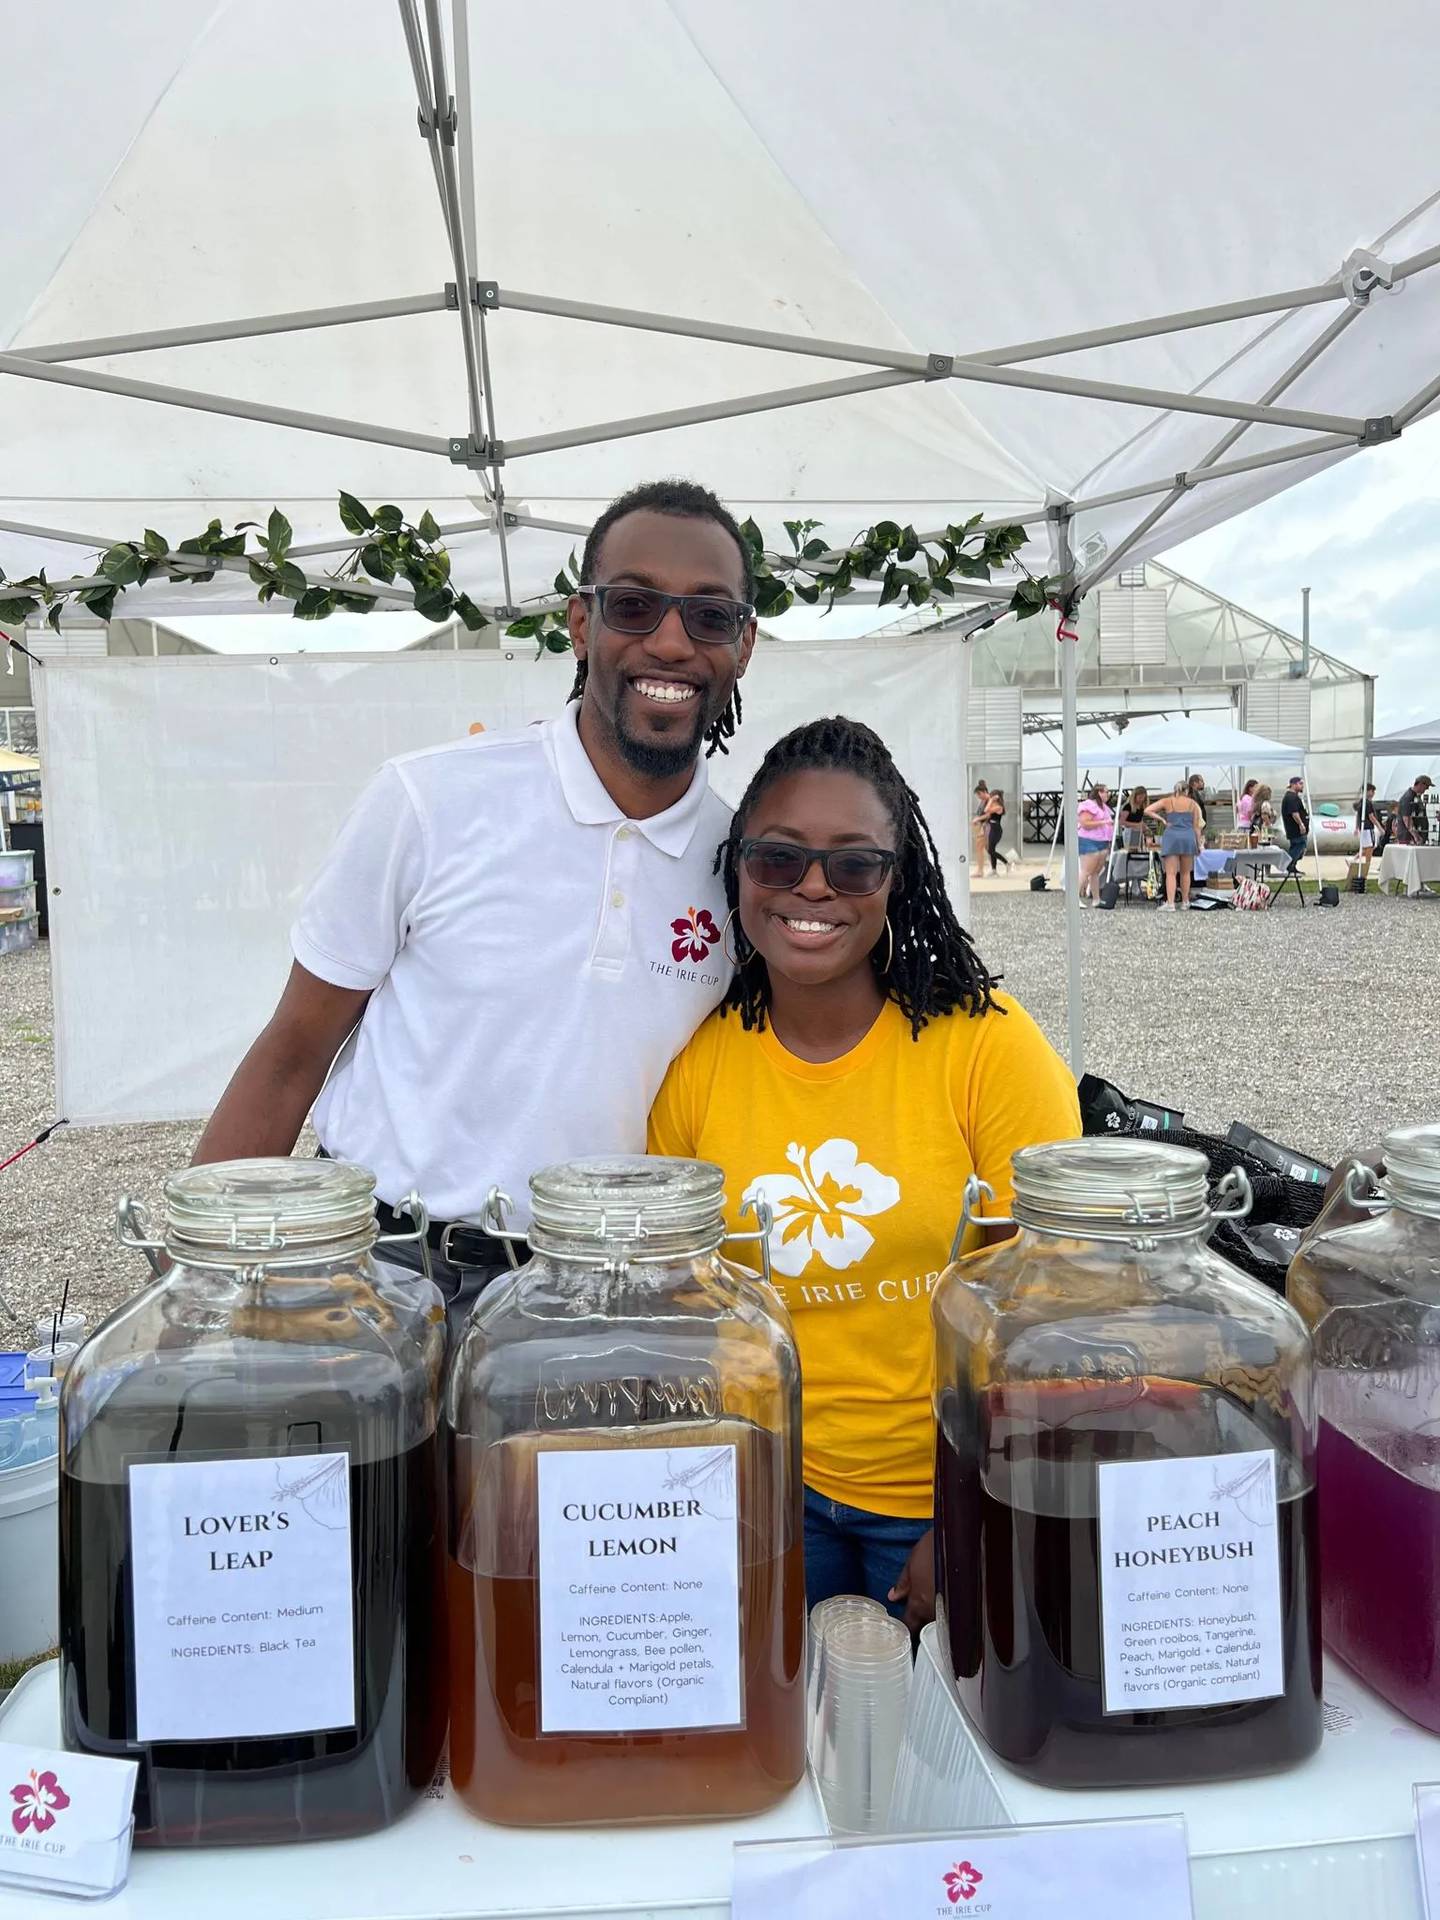 Joe and LaShanda Lewis are opening a new tea shop in downtown Huntley later this year in 2022 after operating the business from their home and farmers' markets since 2020.